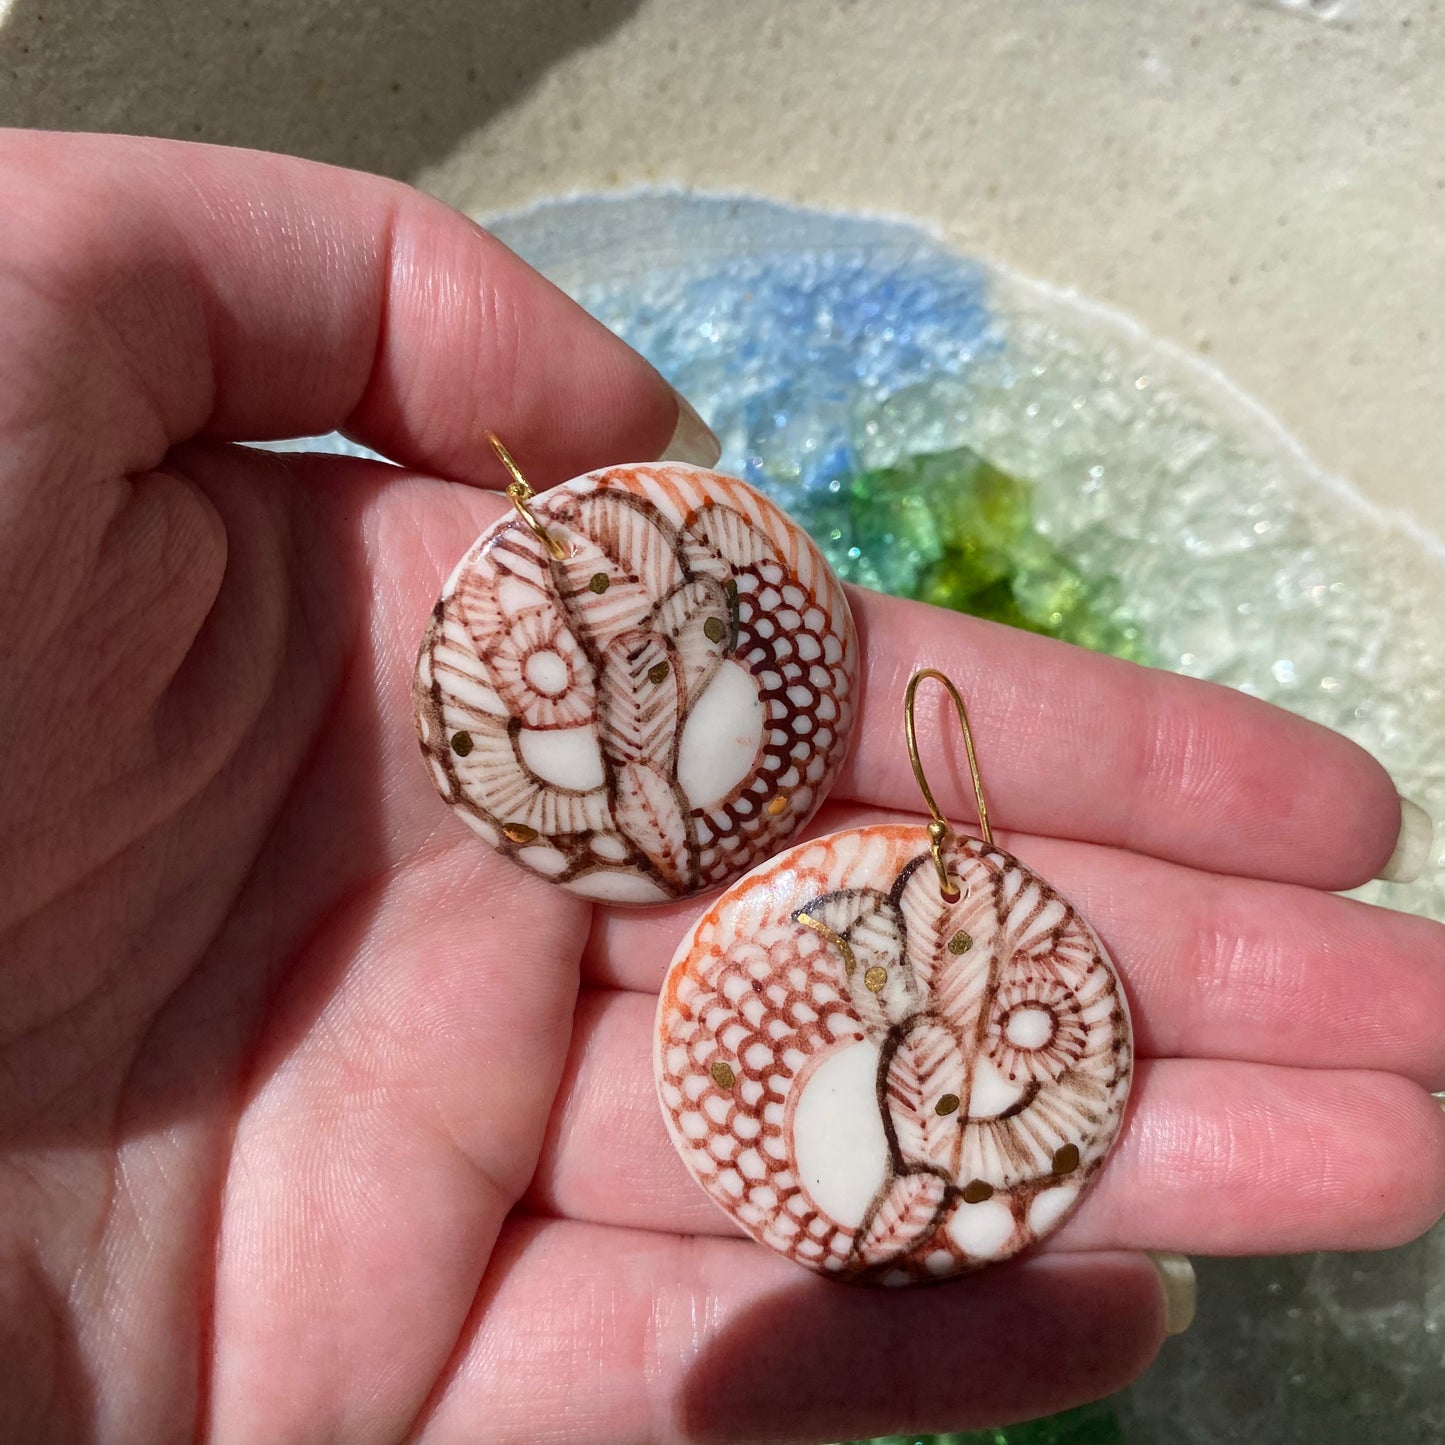 Warm Toned Porcelain Earrings With Hand Illustrated Design